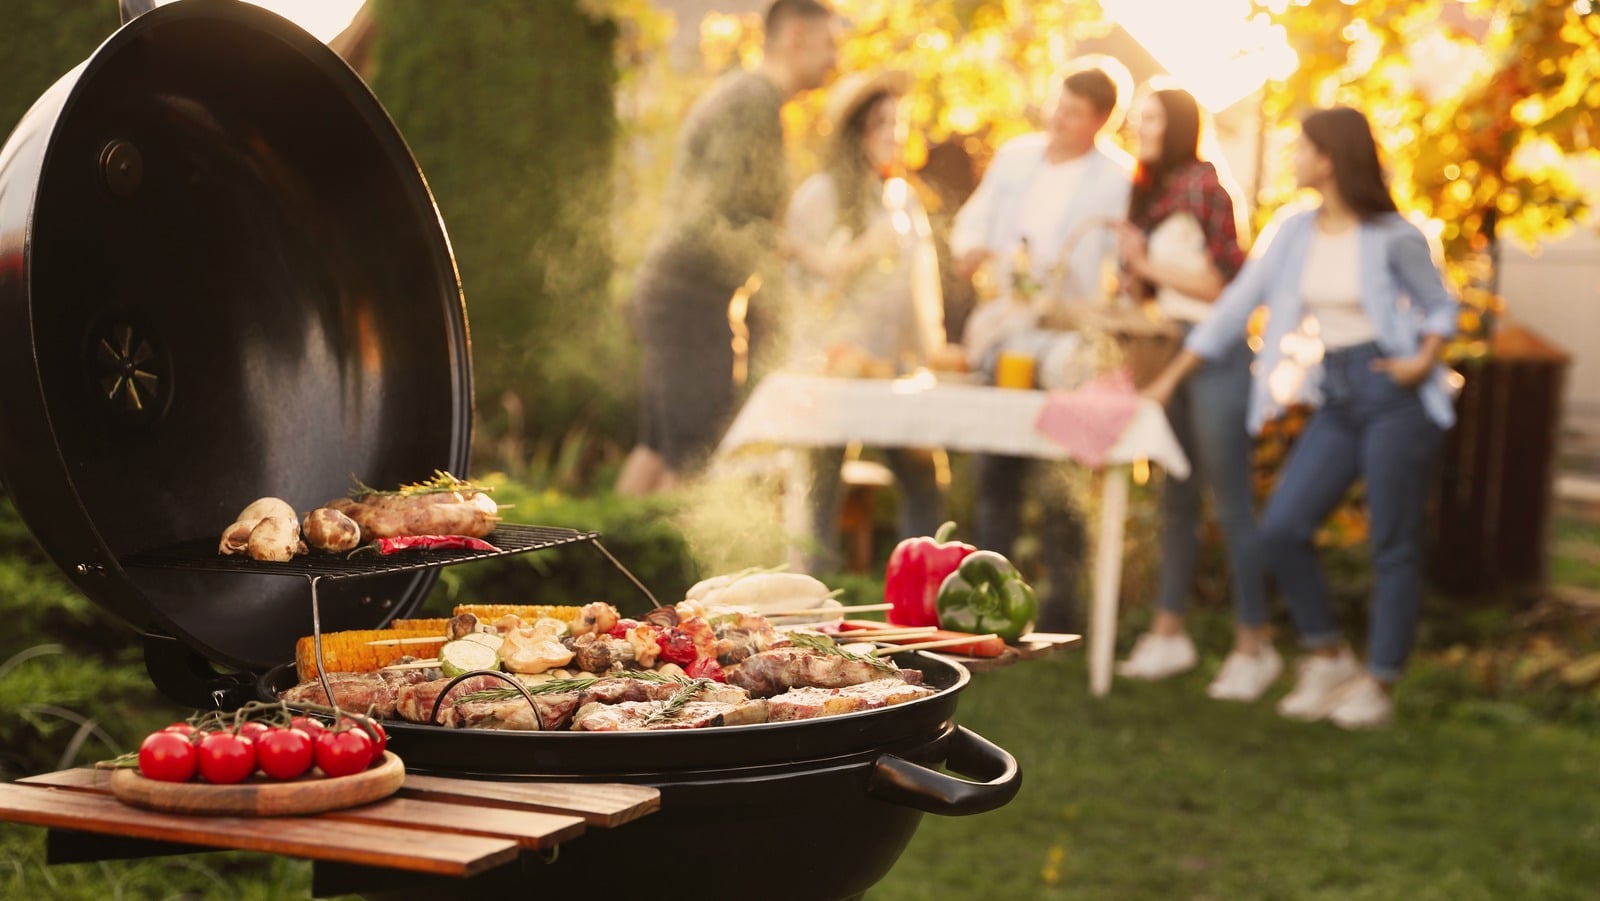 Group of Friends Having a BBQ Outdoors in Summer